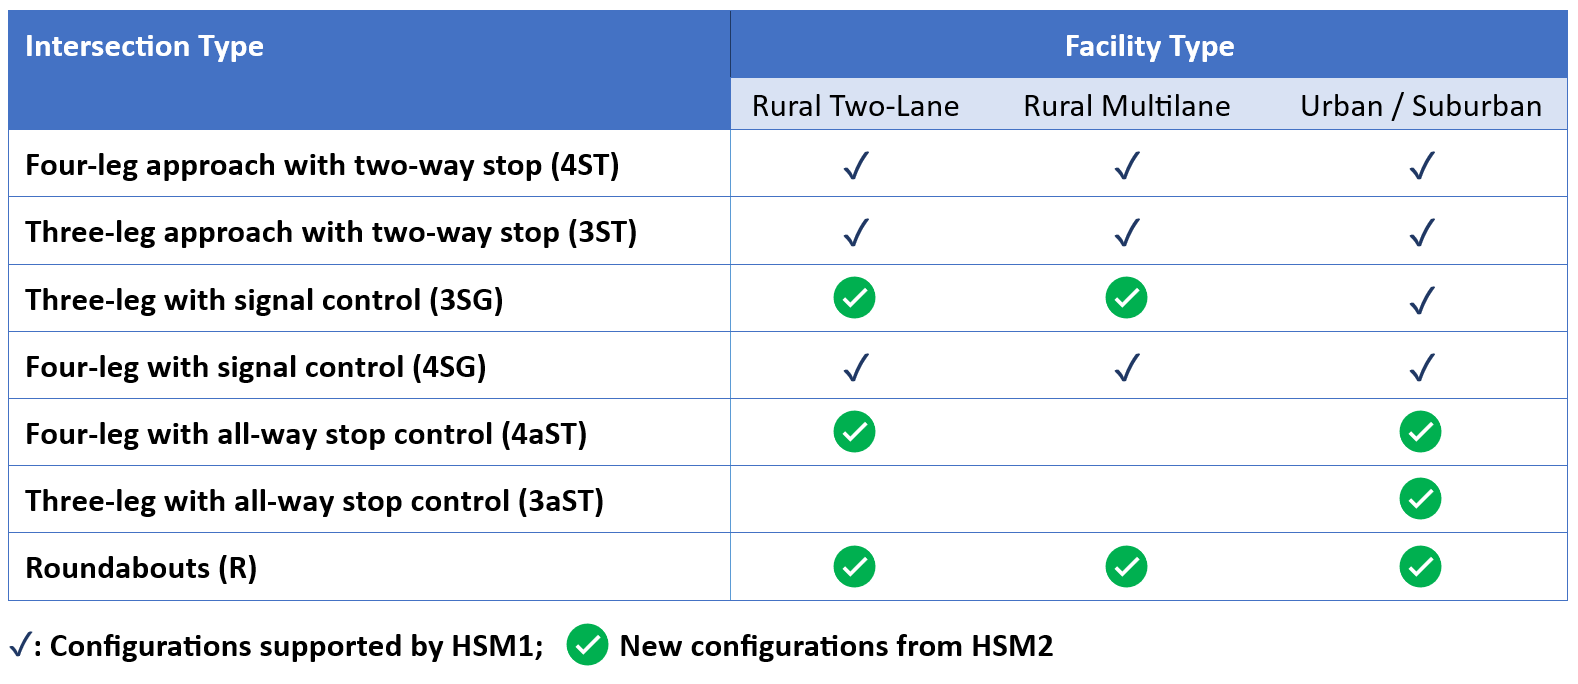 Intersections supported by HSS 2024. Compares HSM1 and HSM2